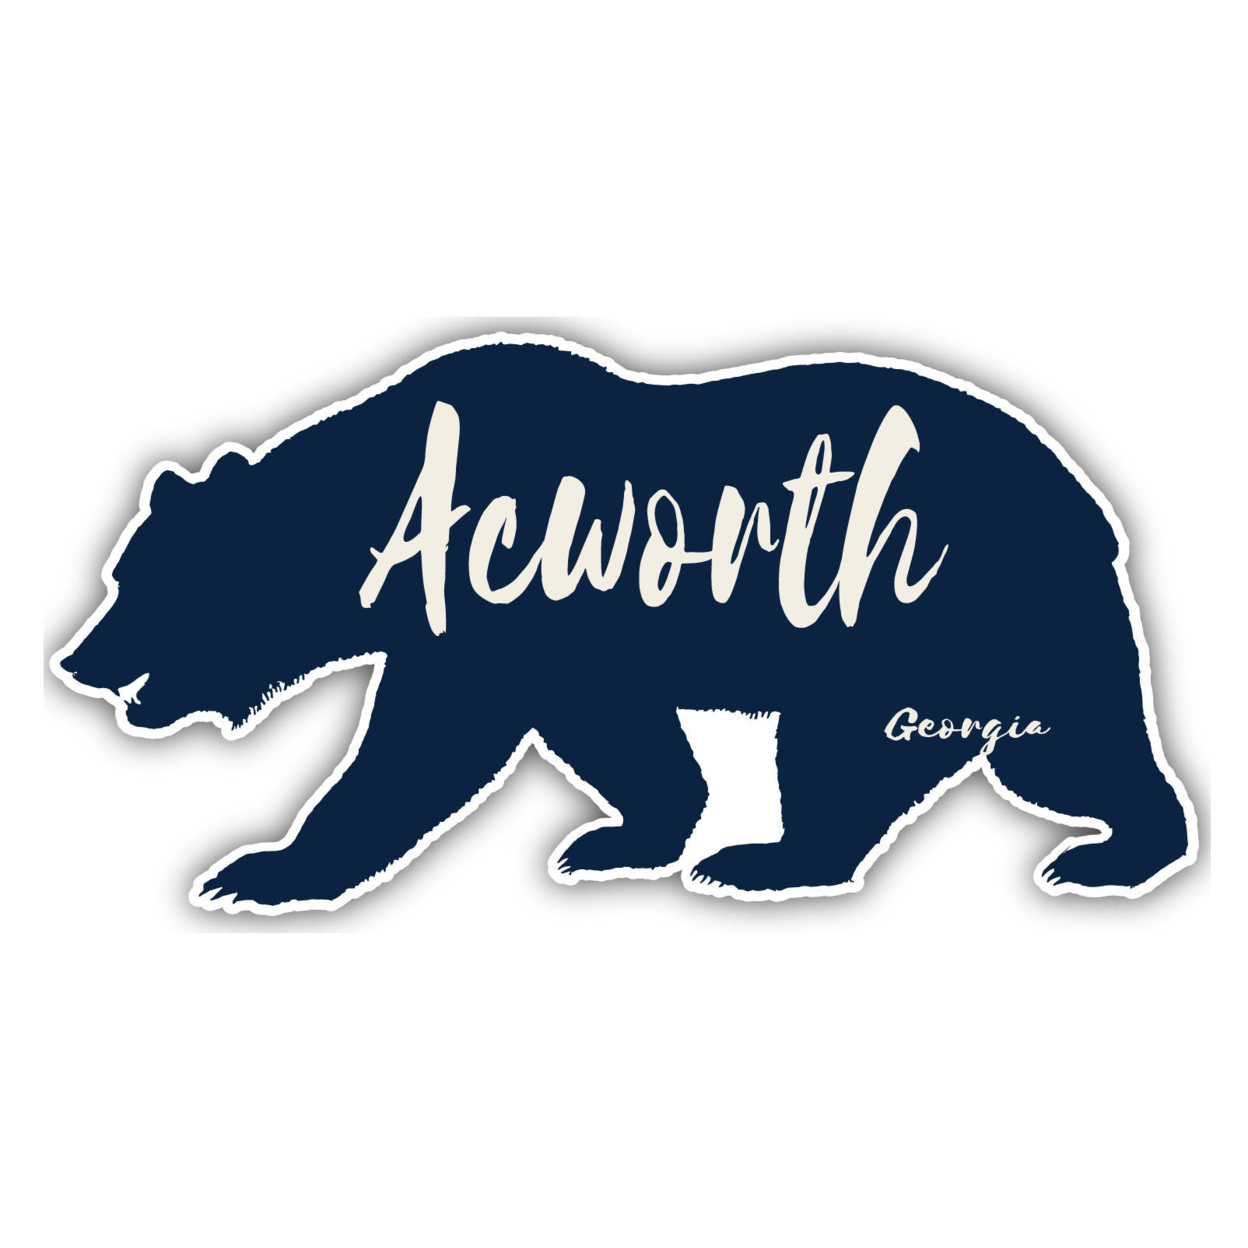 Acworth Georgia Souvenir Decorative Stickers (Choose Theme And Size) - 4-Pack, 4-Inch, Great Outdoors